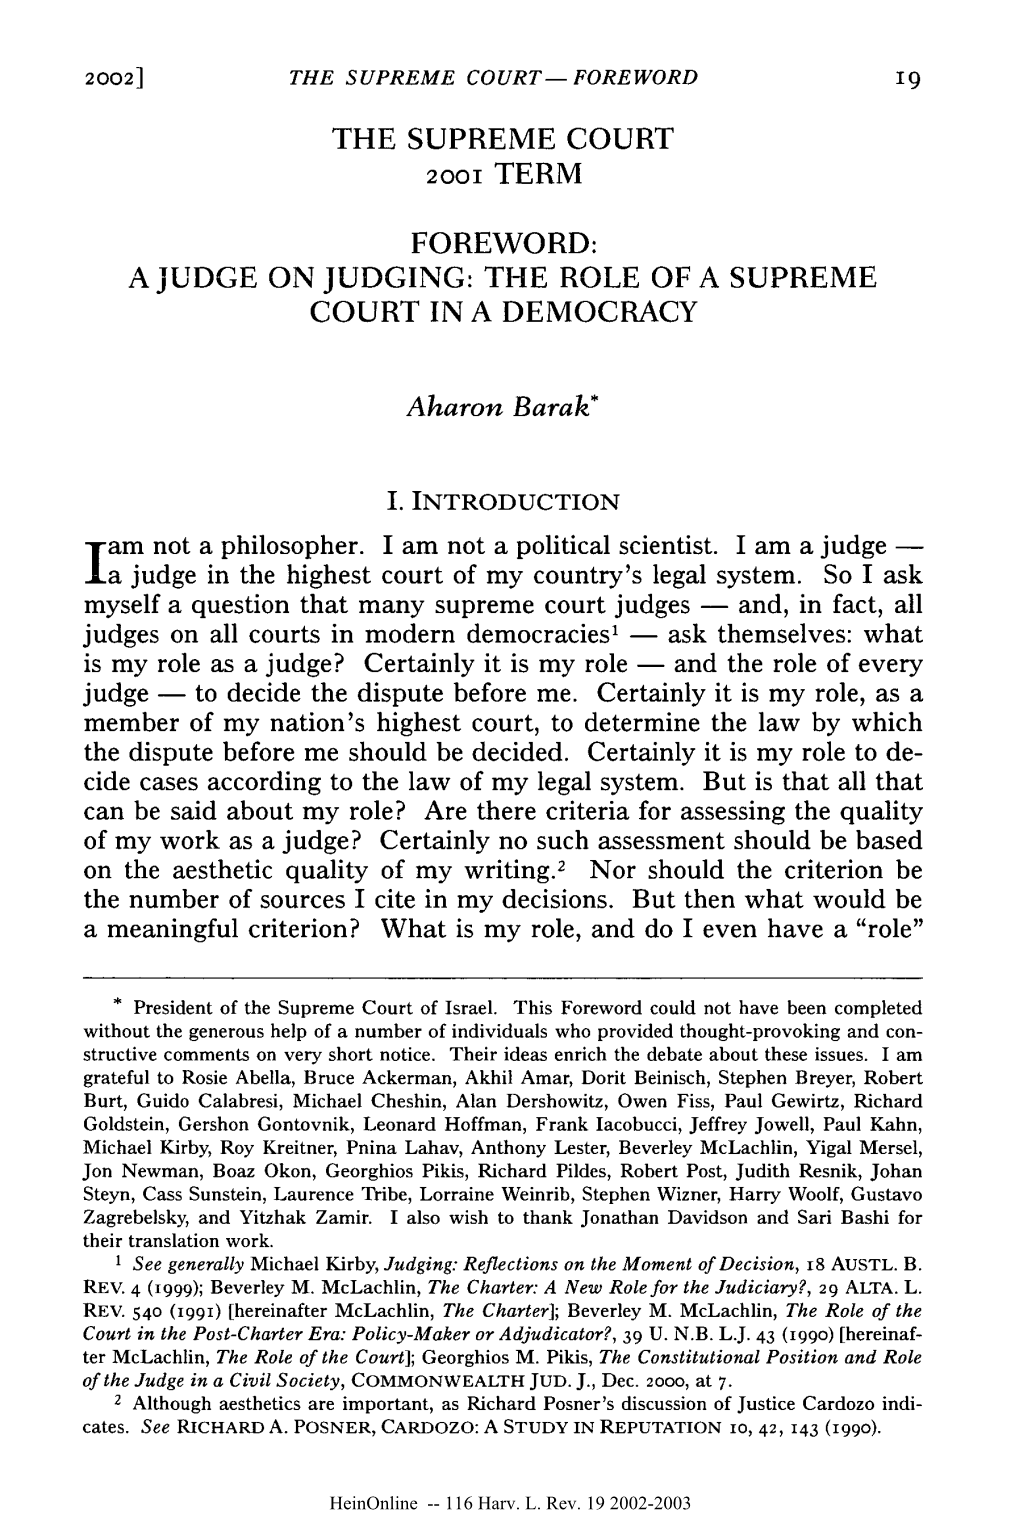 A Judge on Judging: the Role of a Supreme Court in a Democracy